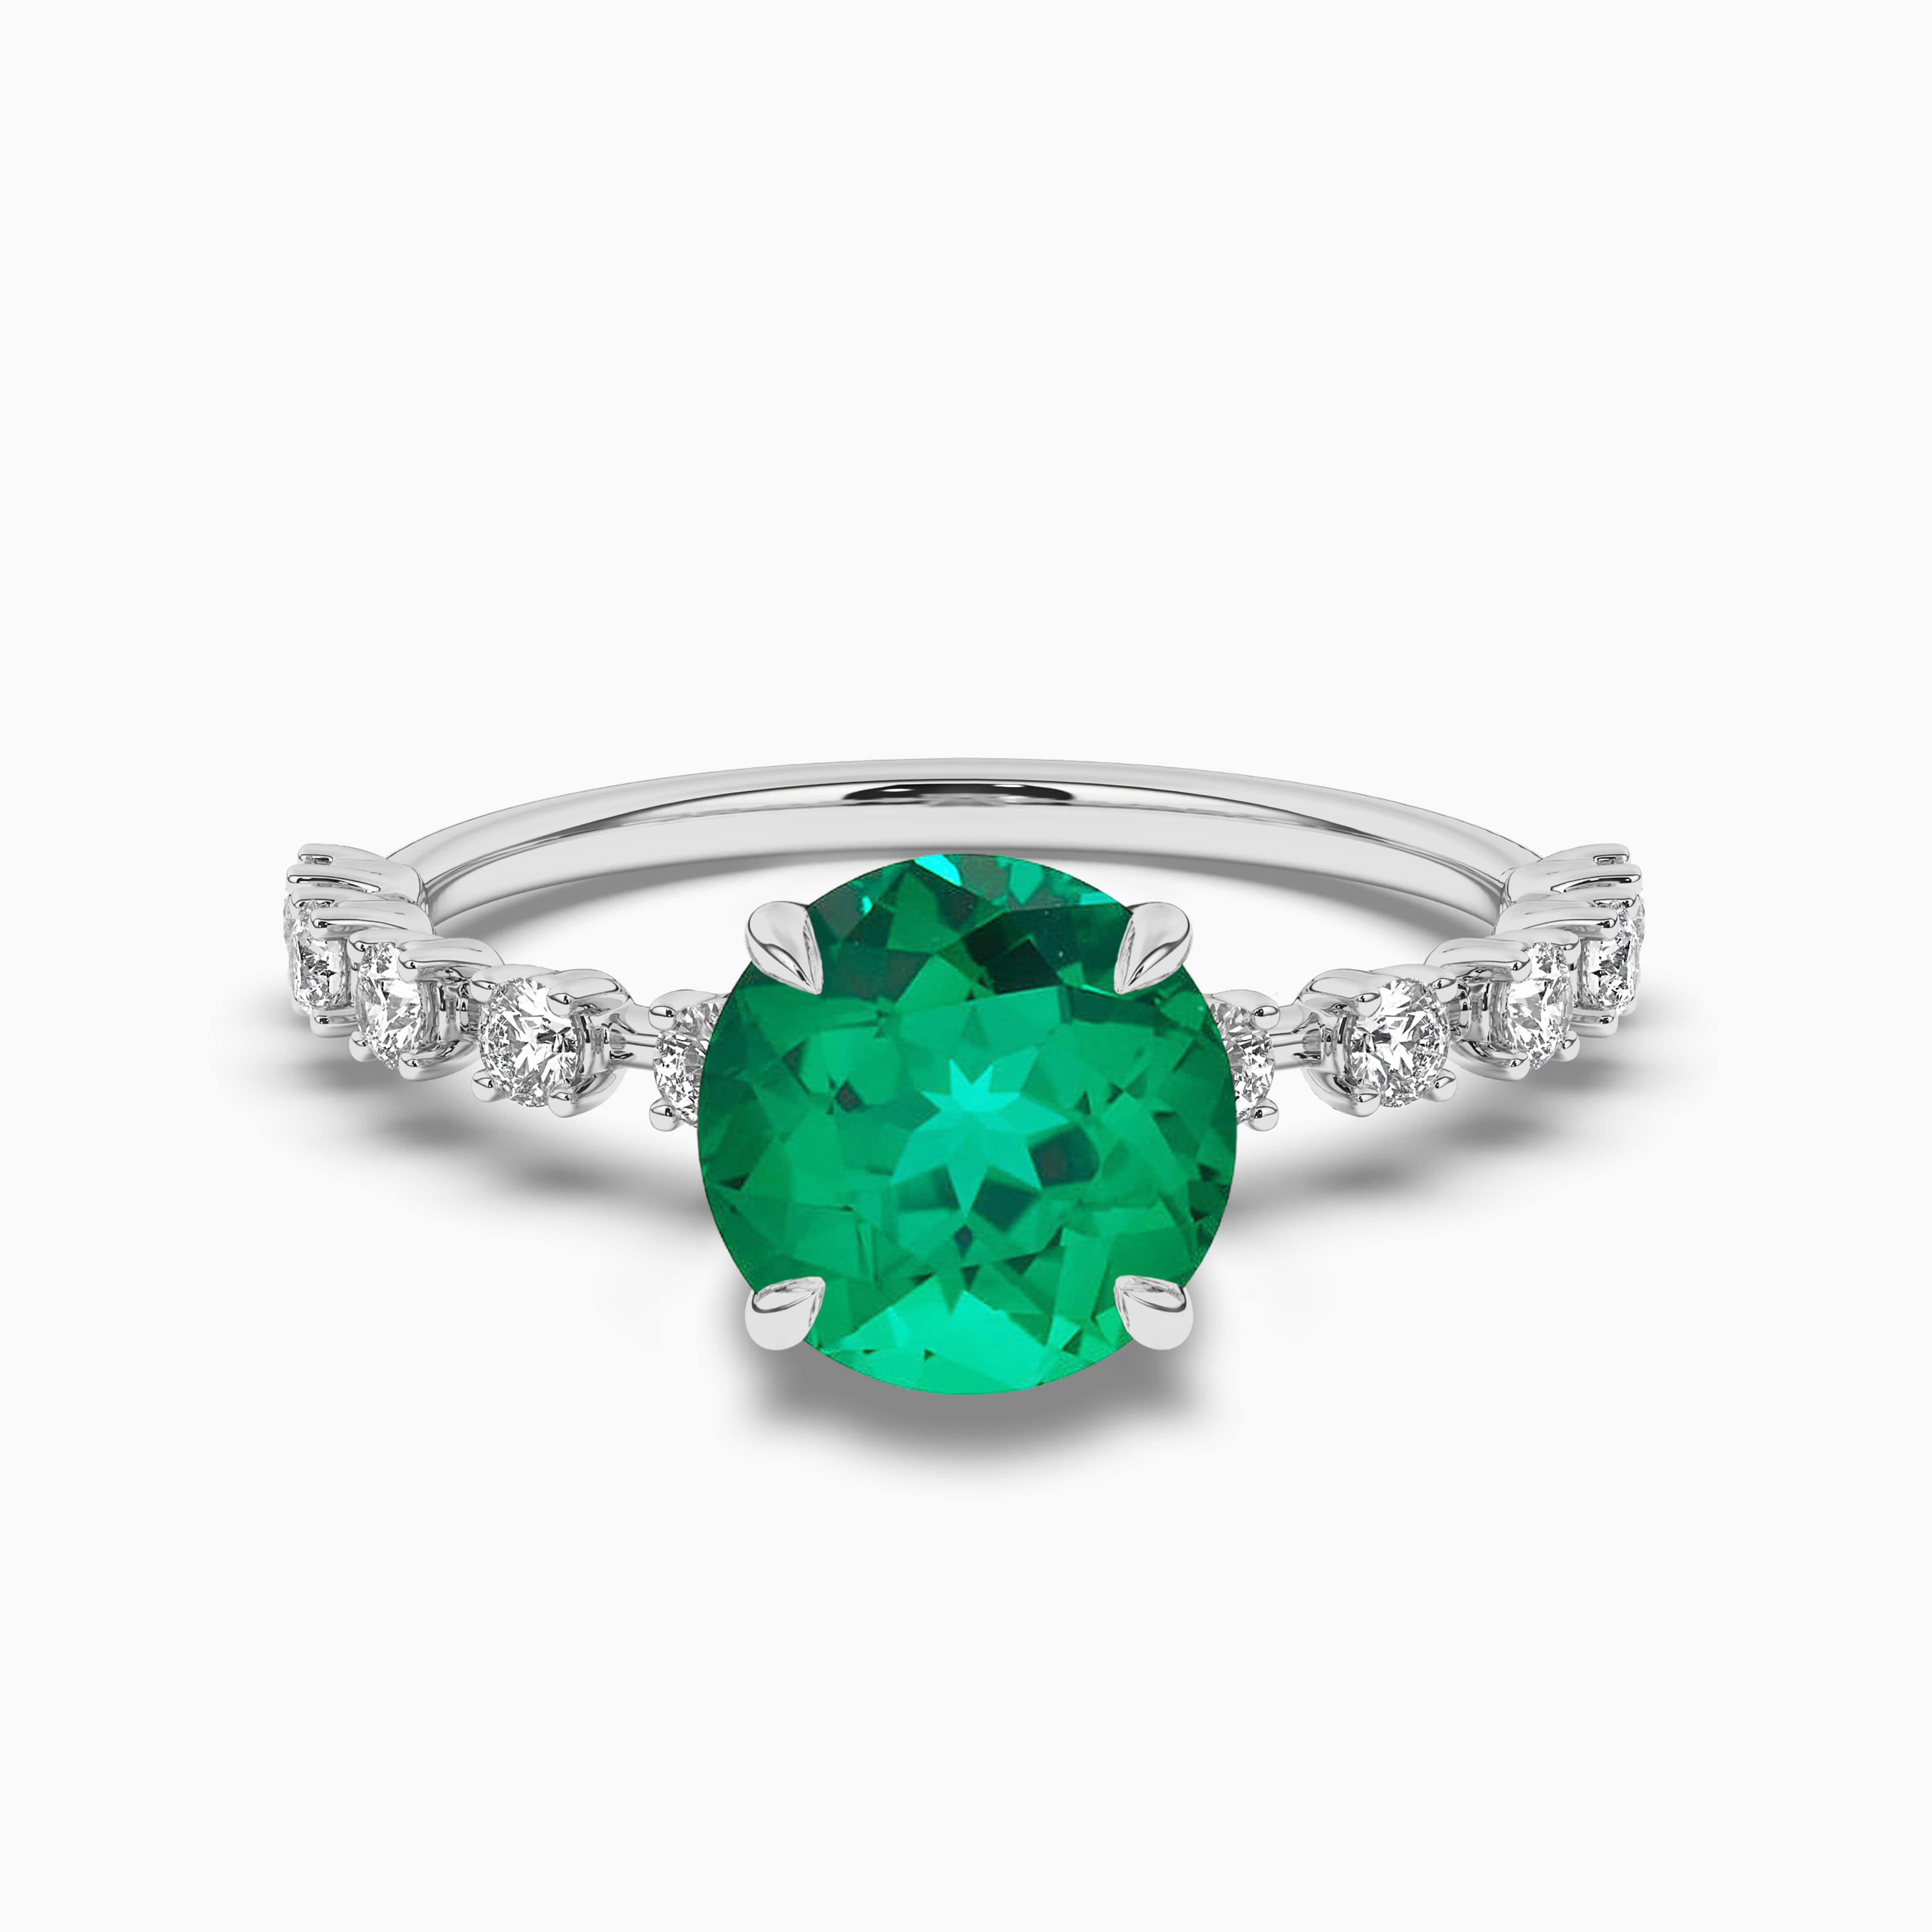 ROUND EMERALD RING IN WHITE GOLD